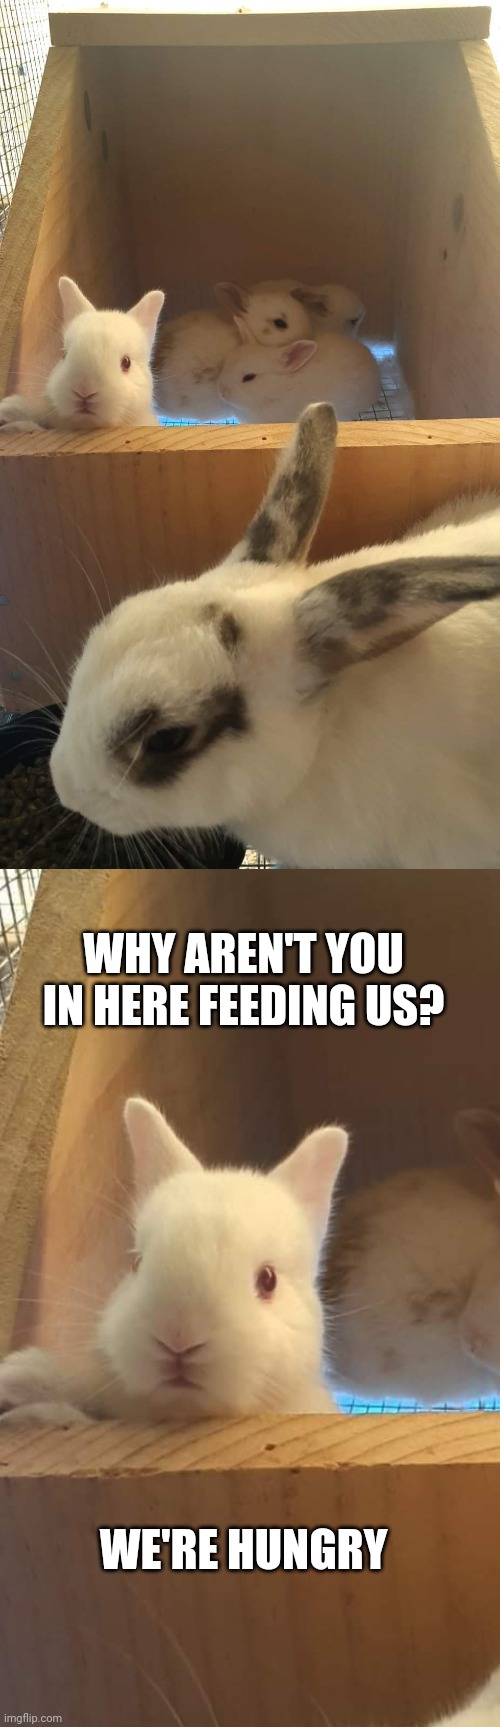 GRUMPY BUNNY | WHY AREN'T YOU IN HERE FEEDING US? WE'RE HUNGRY | image tagged in bunnies,rabbits,bunny,rabbit | made w/ Imgflip meme maker